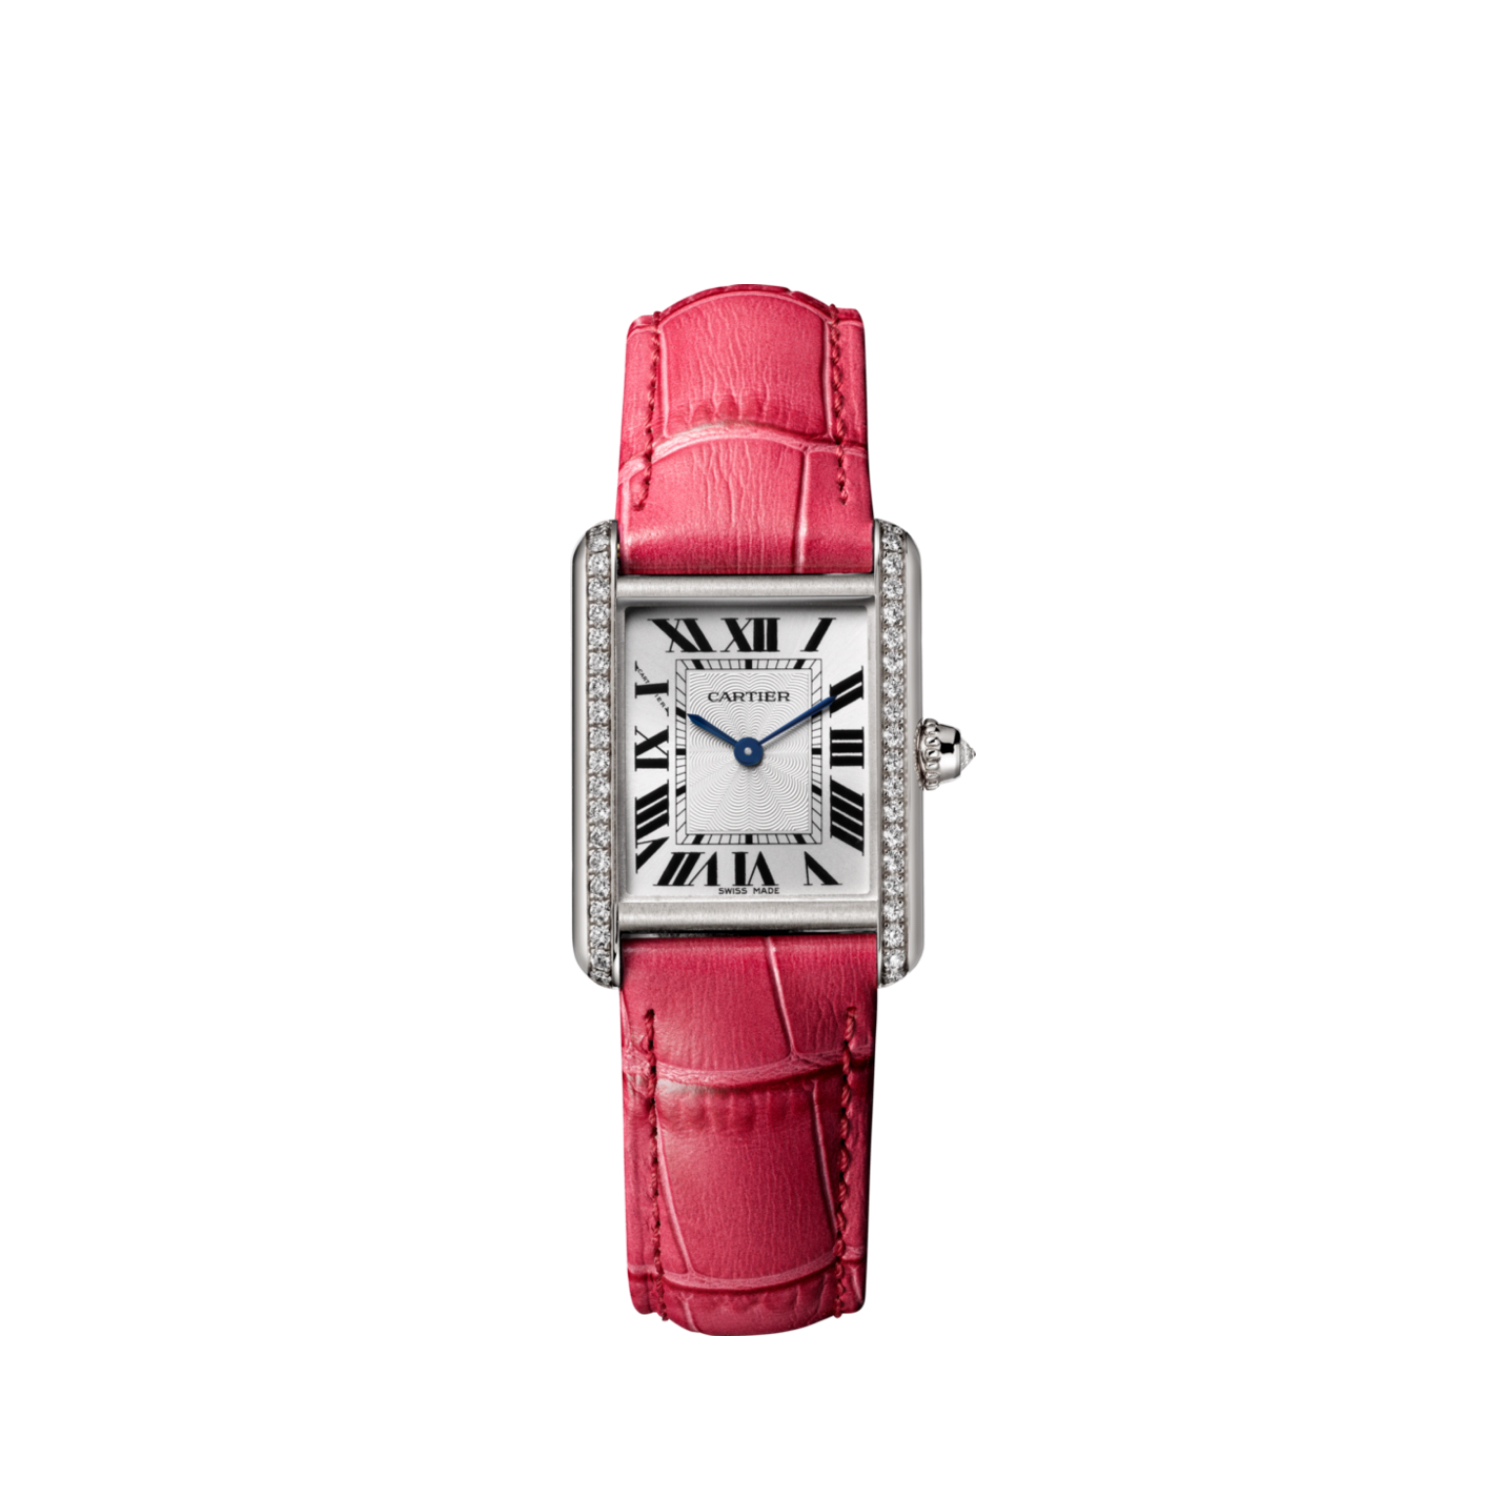 Resim TANK LOUISE CARTIER - WHITE GOLD HAND-WOUND SMALL